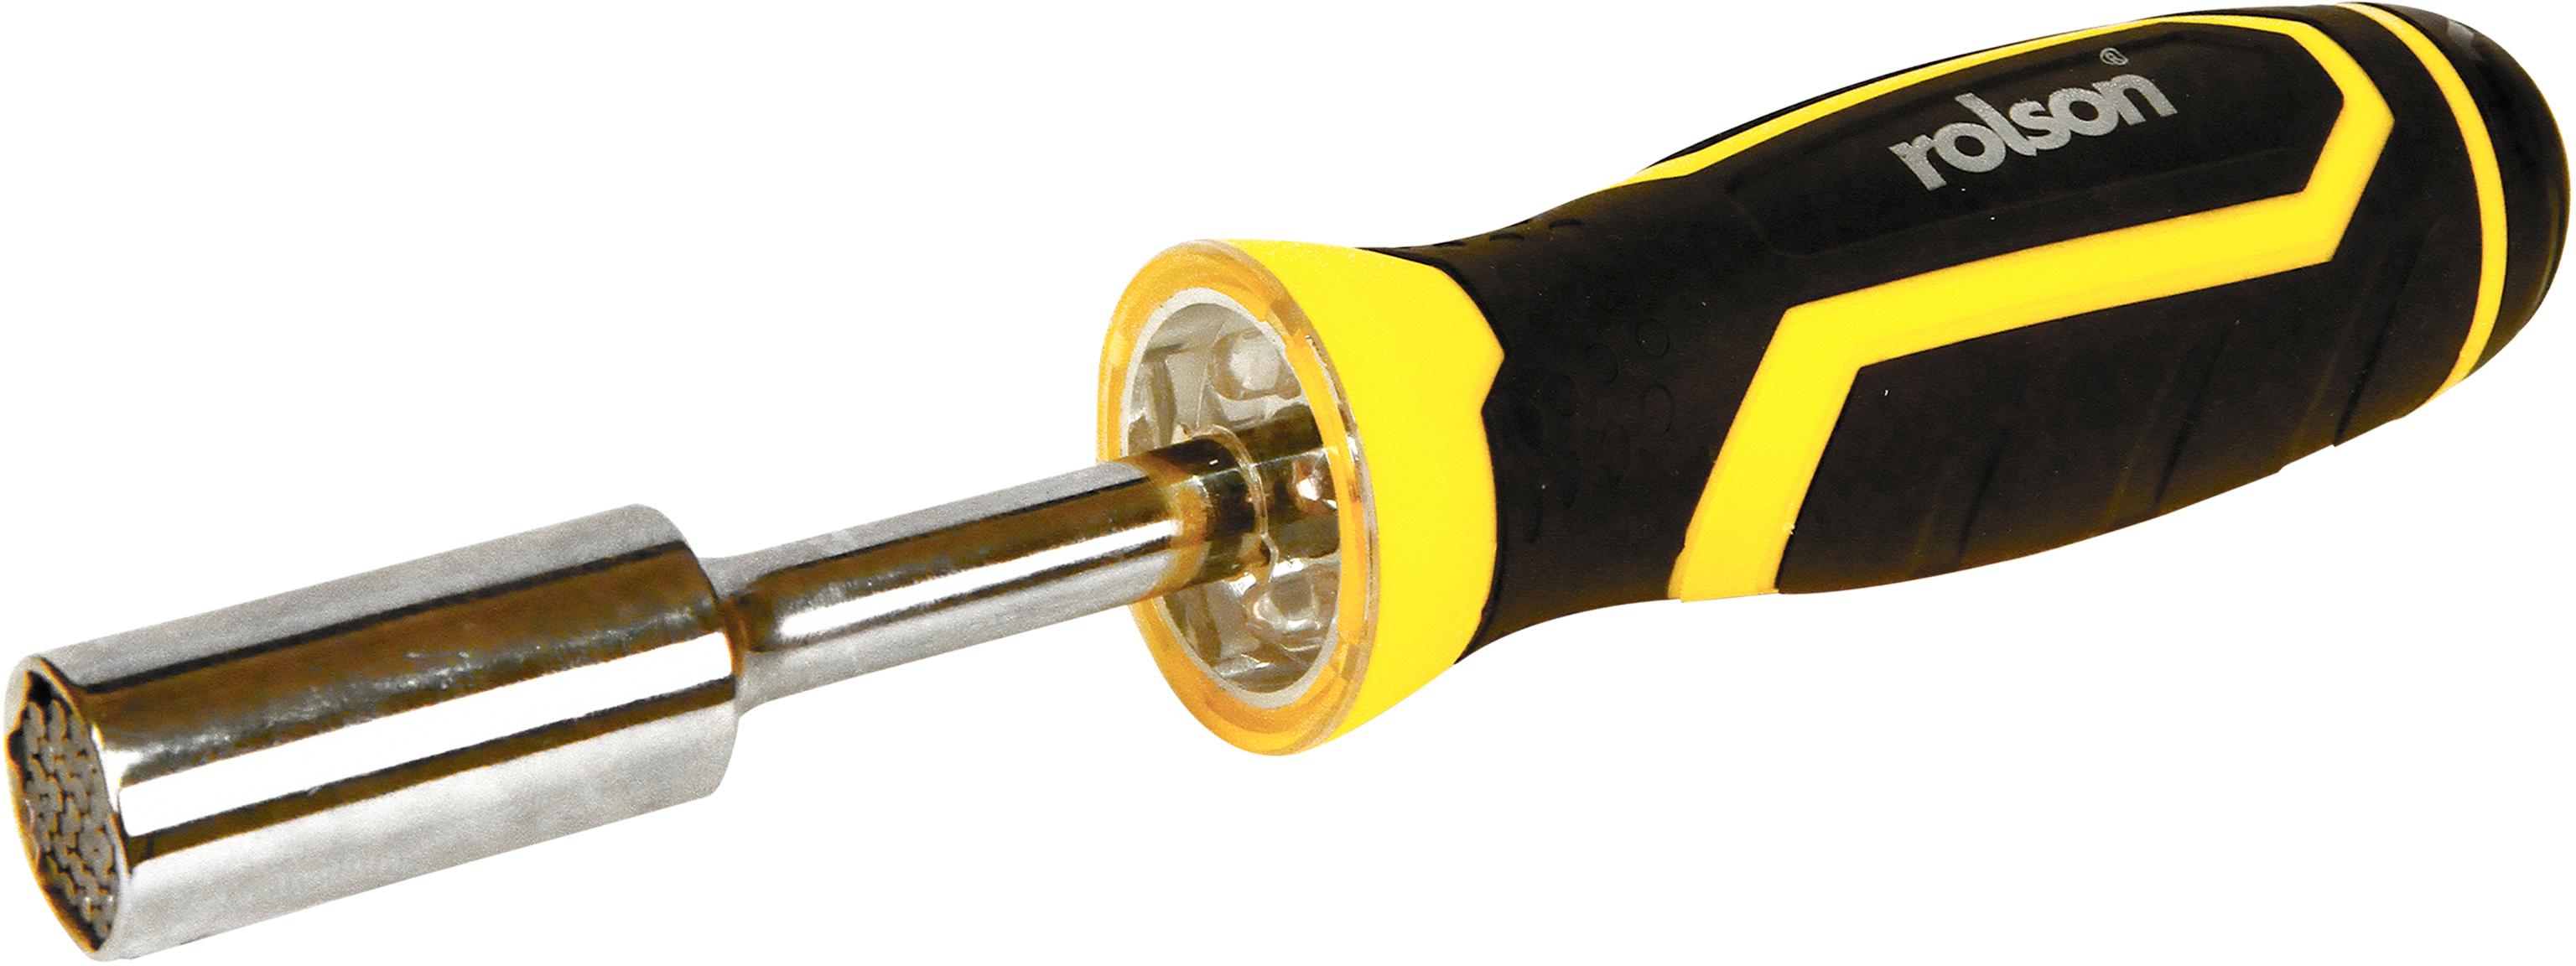 Rolson Led Universal Wrench